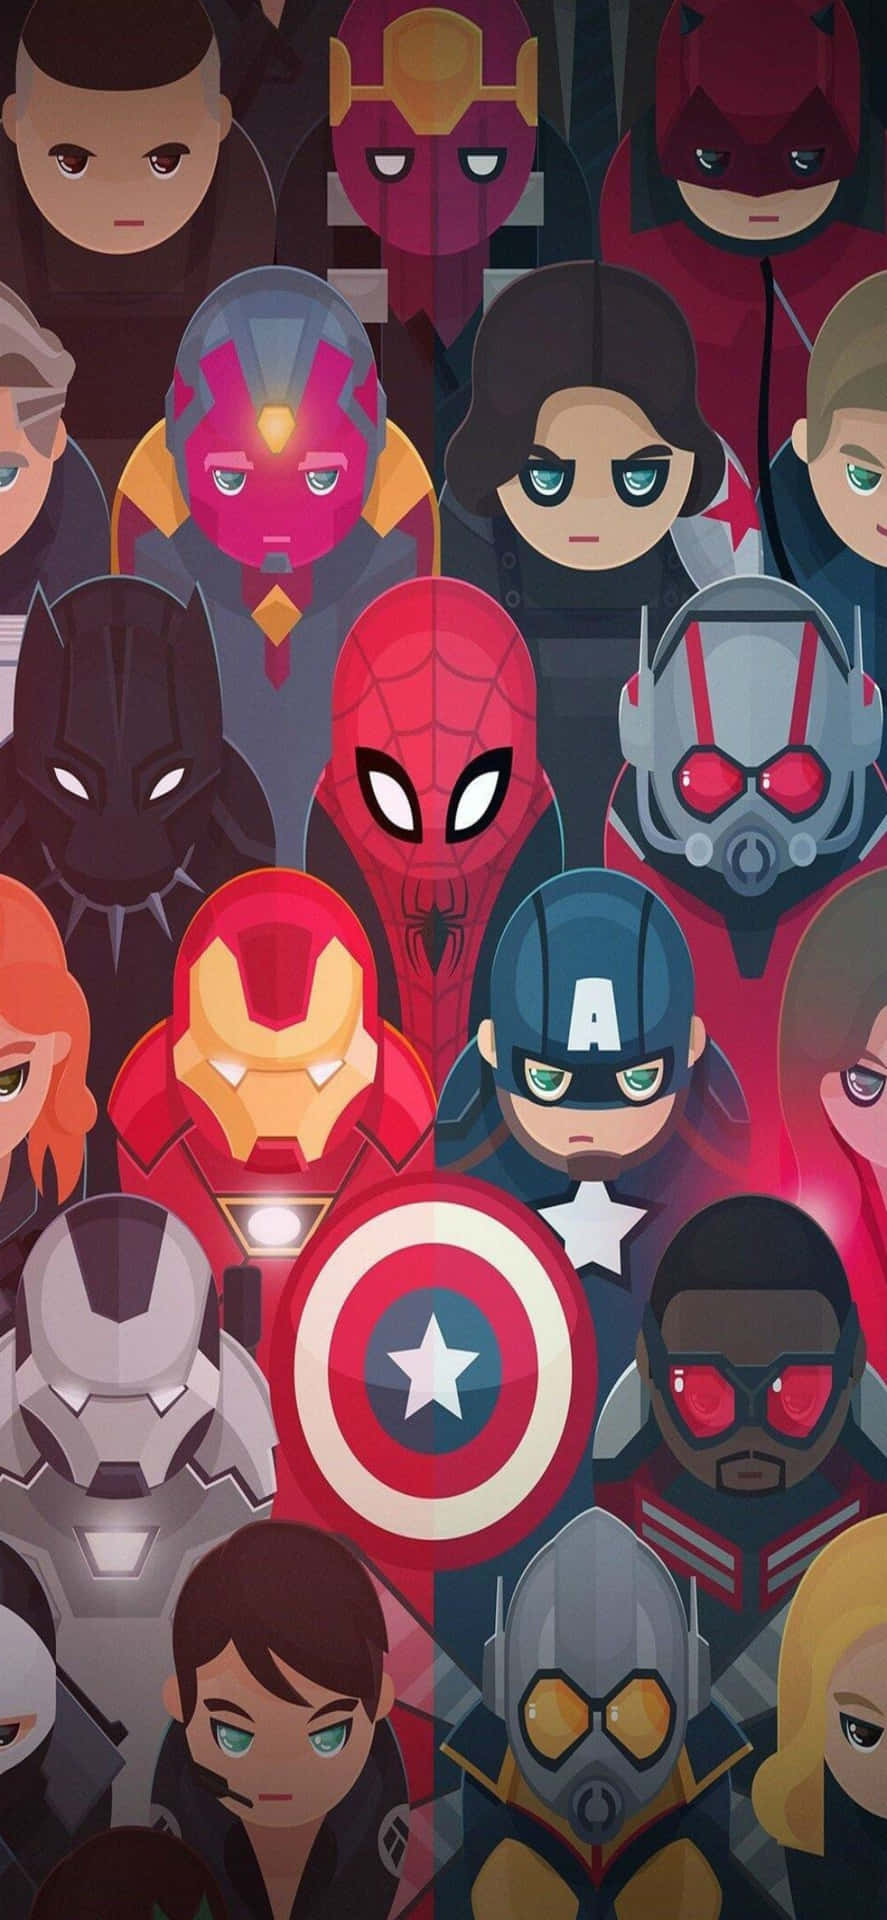 Power up your iPhone with the team that started it all - Marvel's Avengers